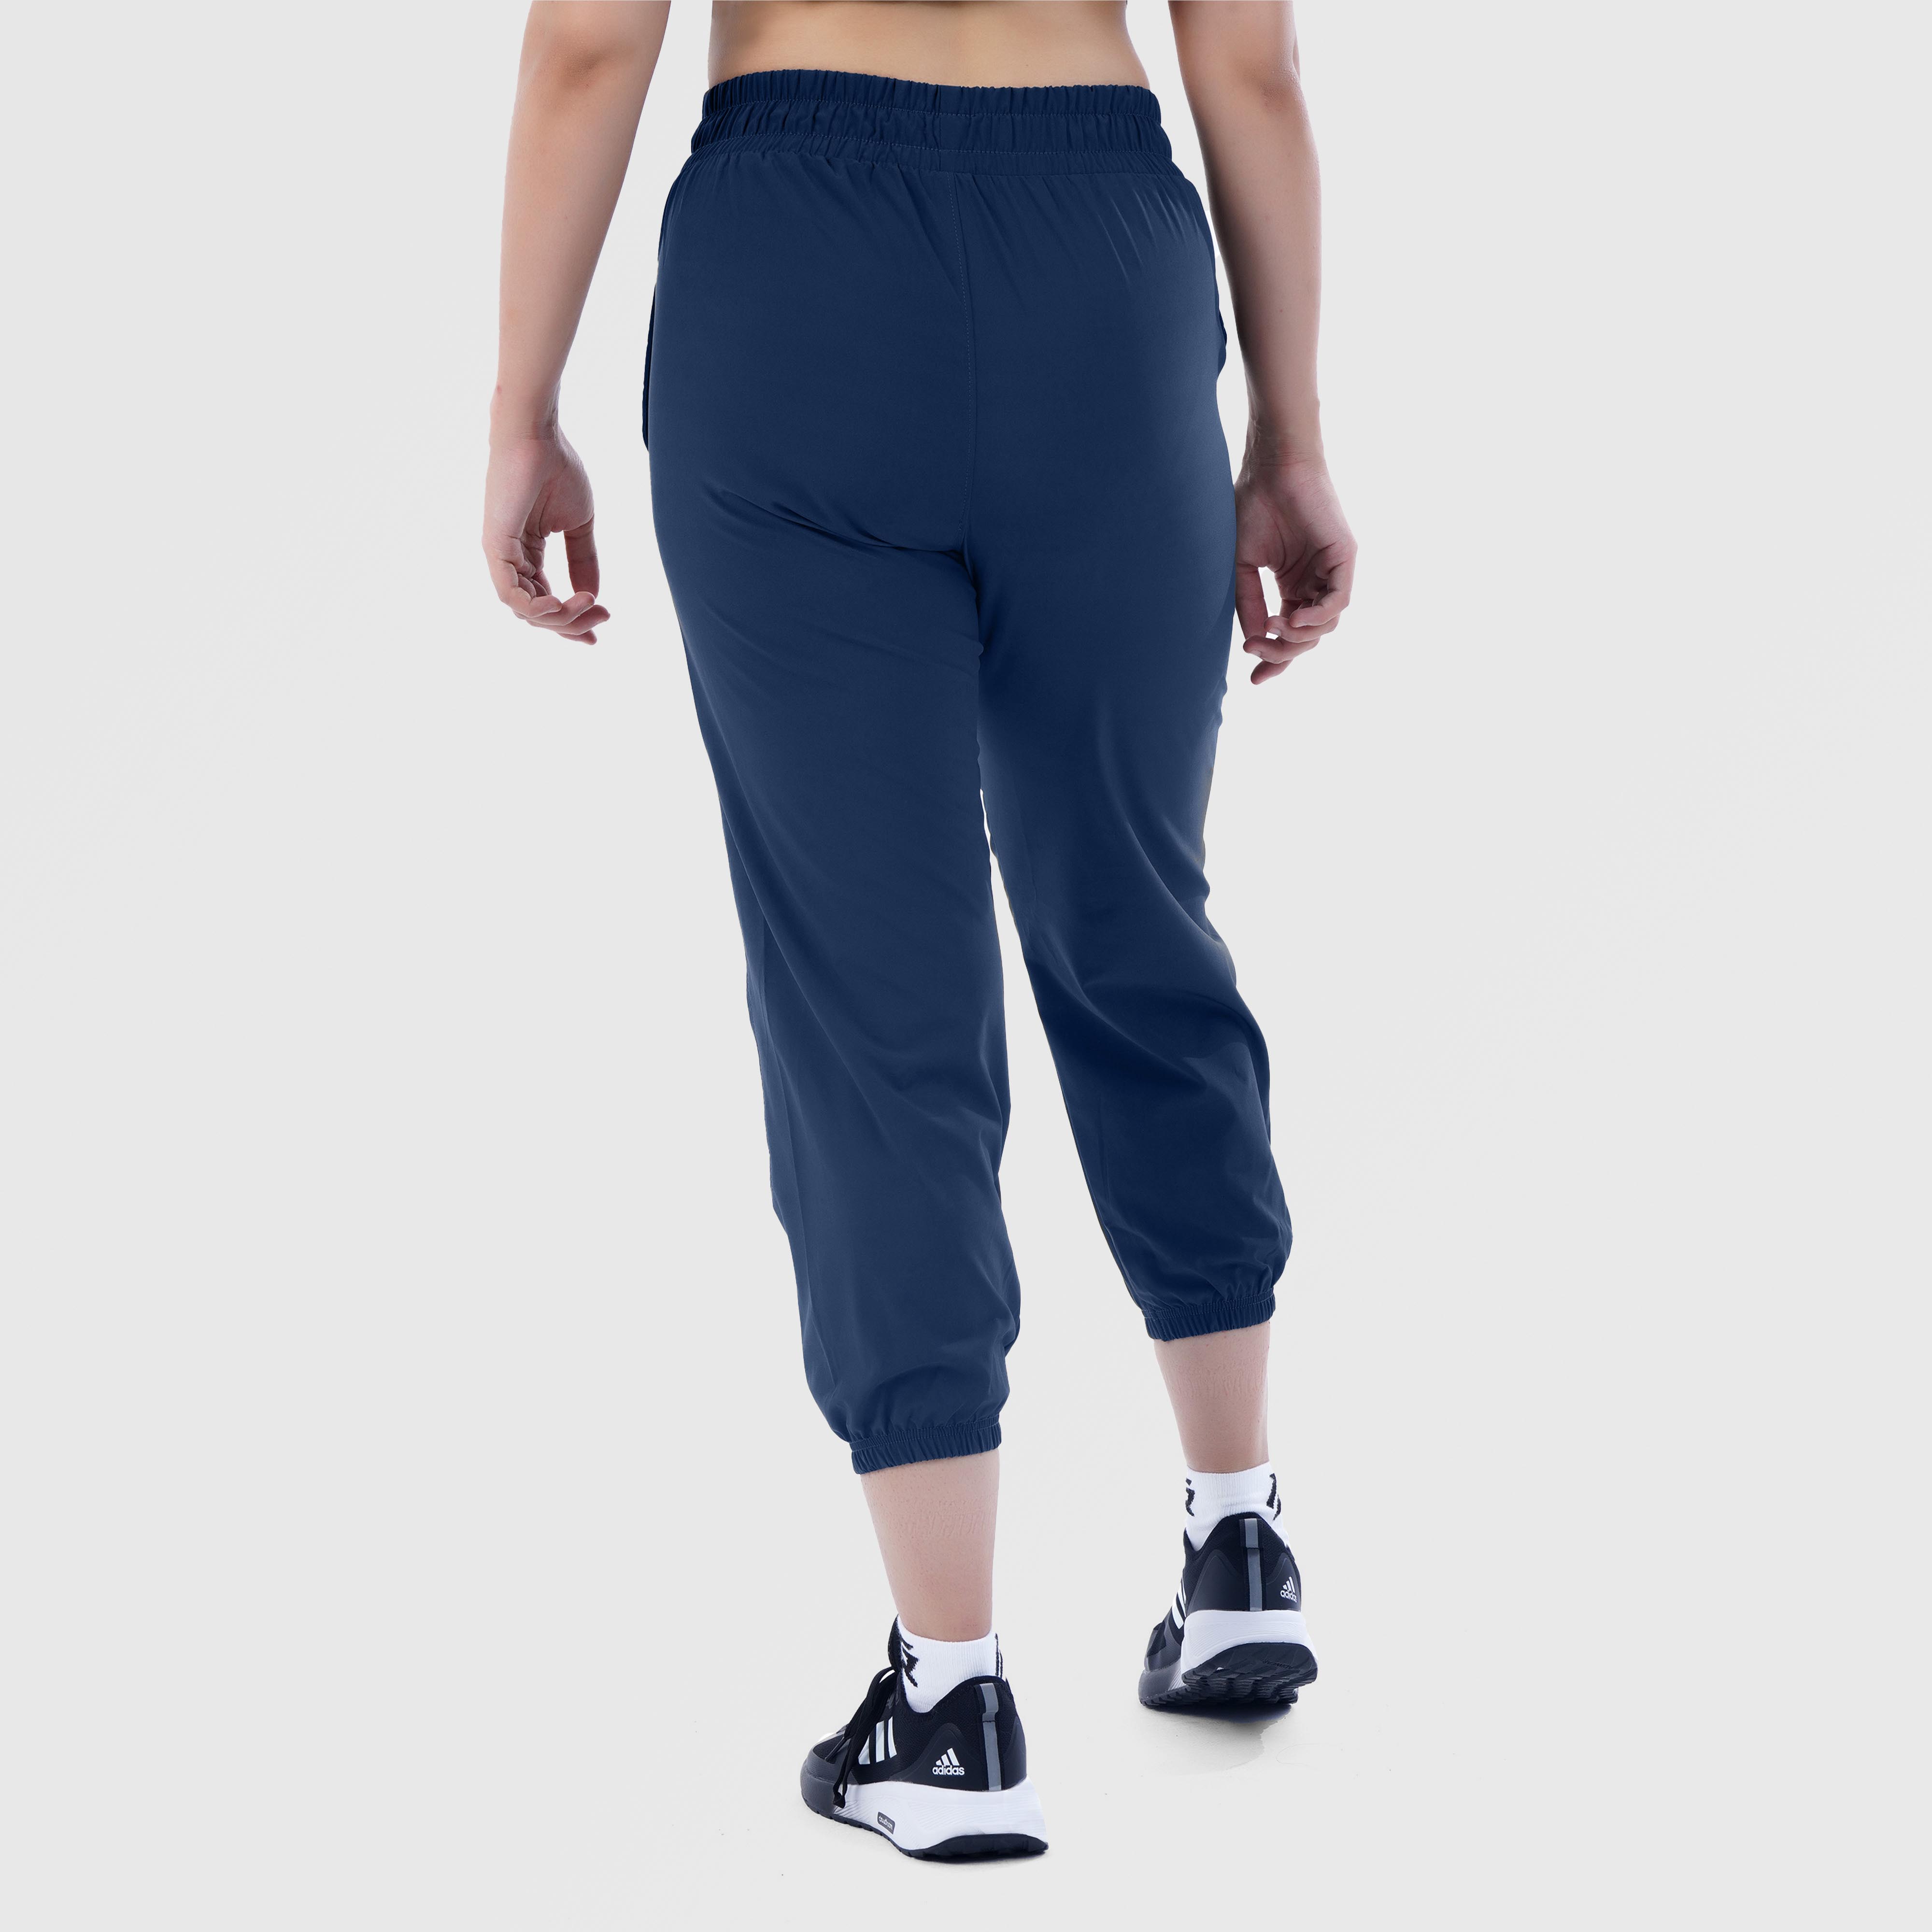 ActiveStride 7/8 Trousers (Navy)